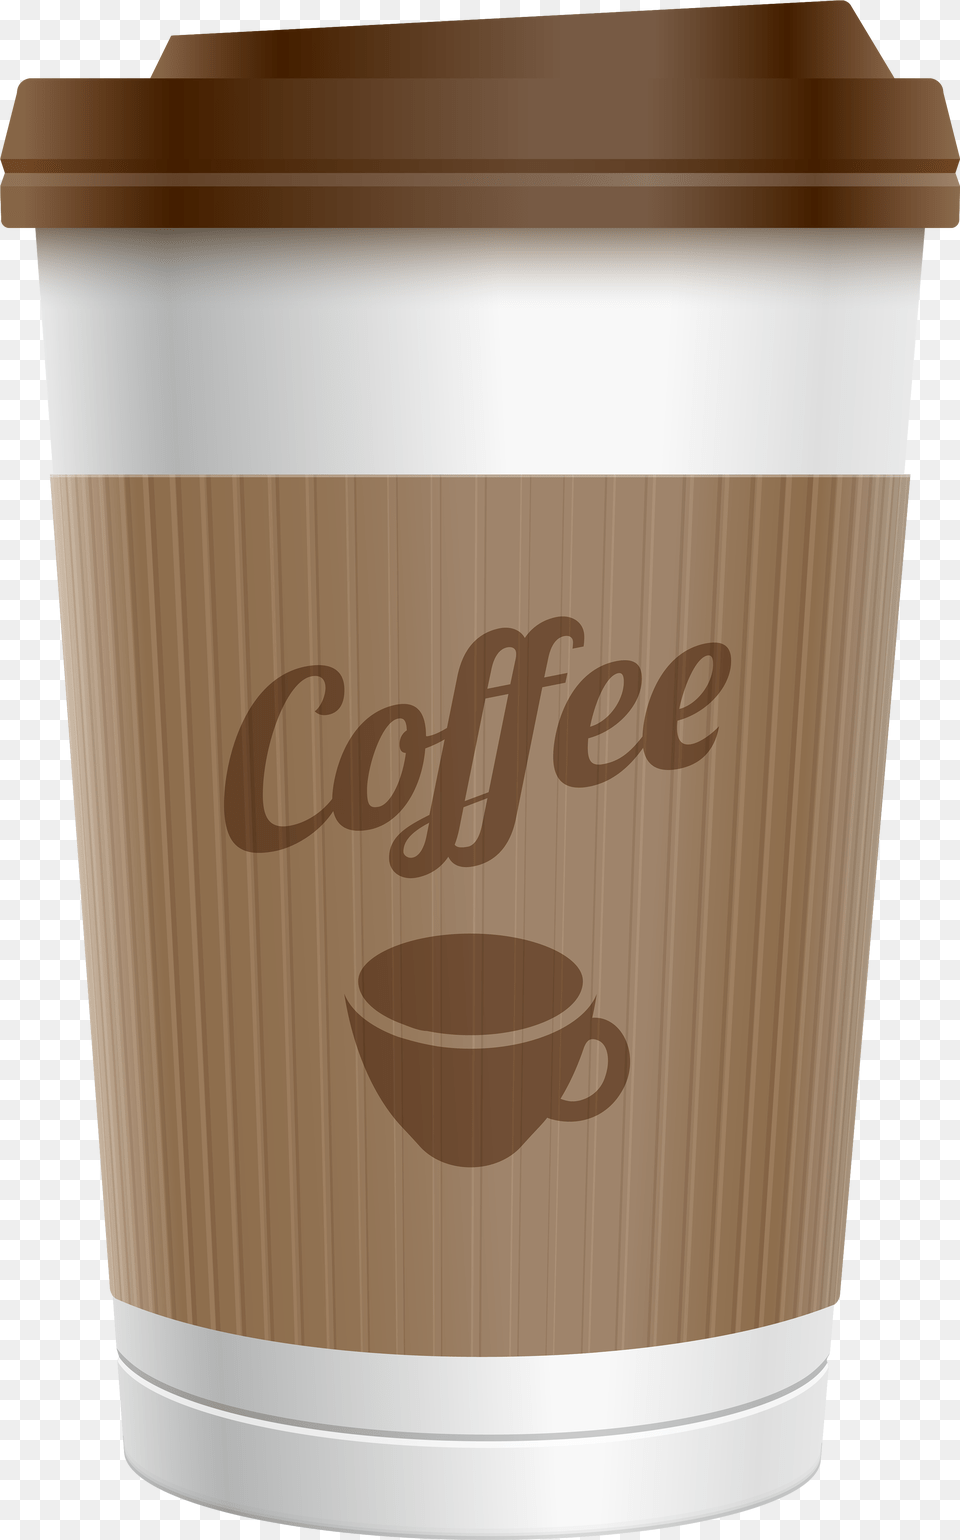 Plastic Coffee Cup Clipart Image Coffee Cup Background, Mailbox, Beverage, Coffee Cup, Cream Free Transparent Png